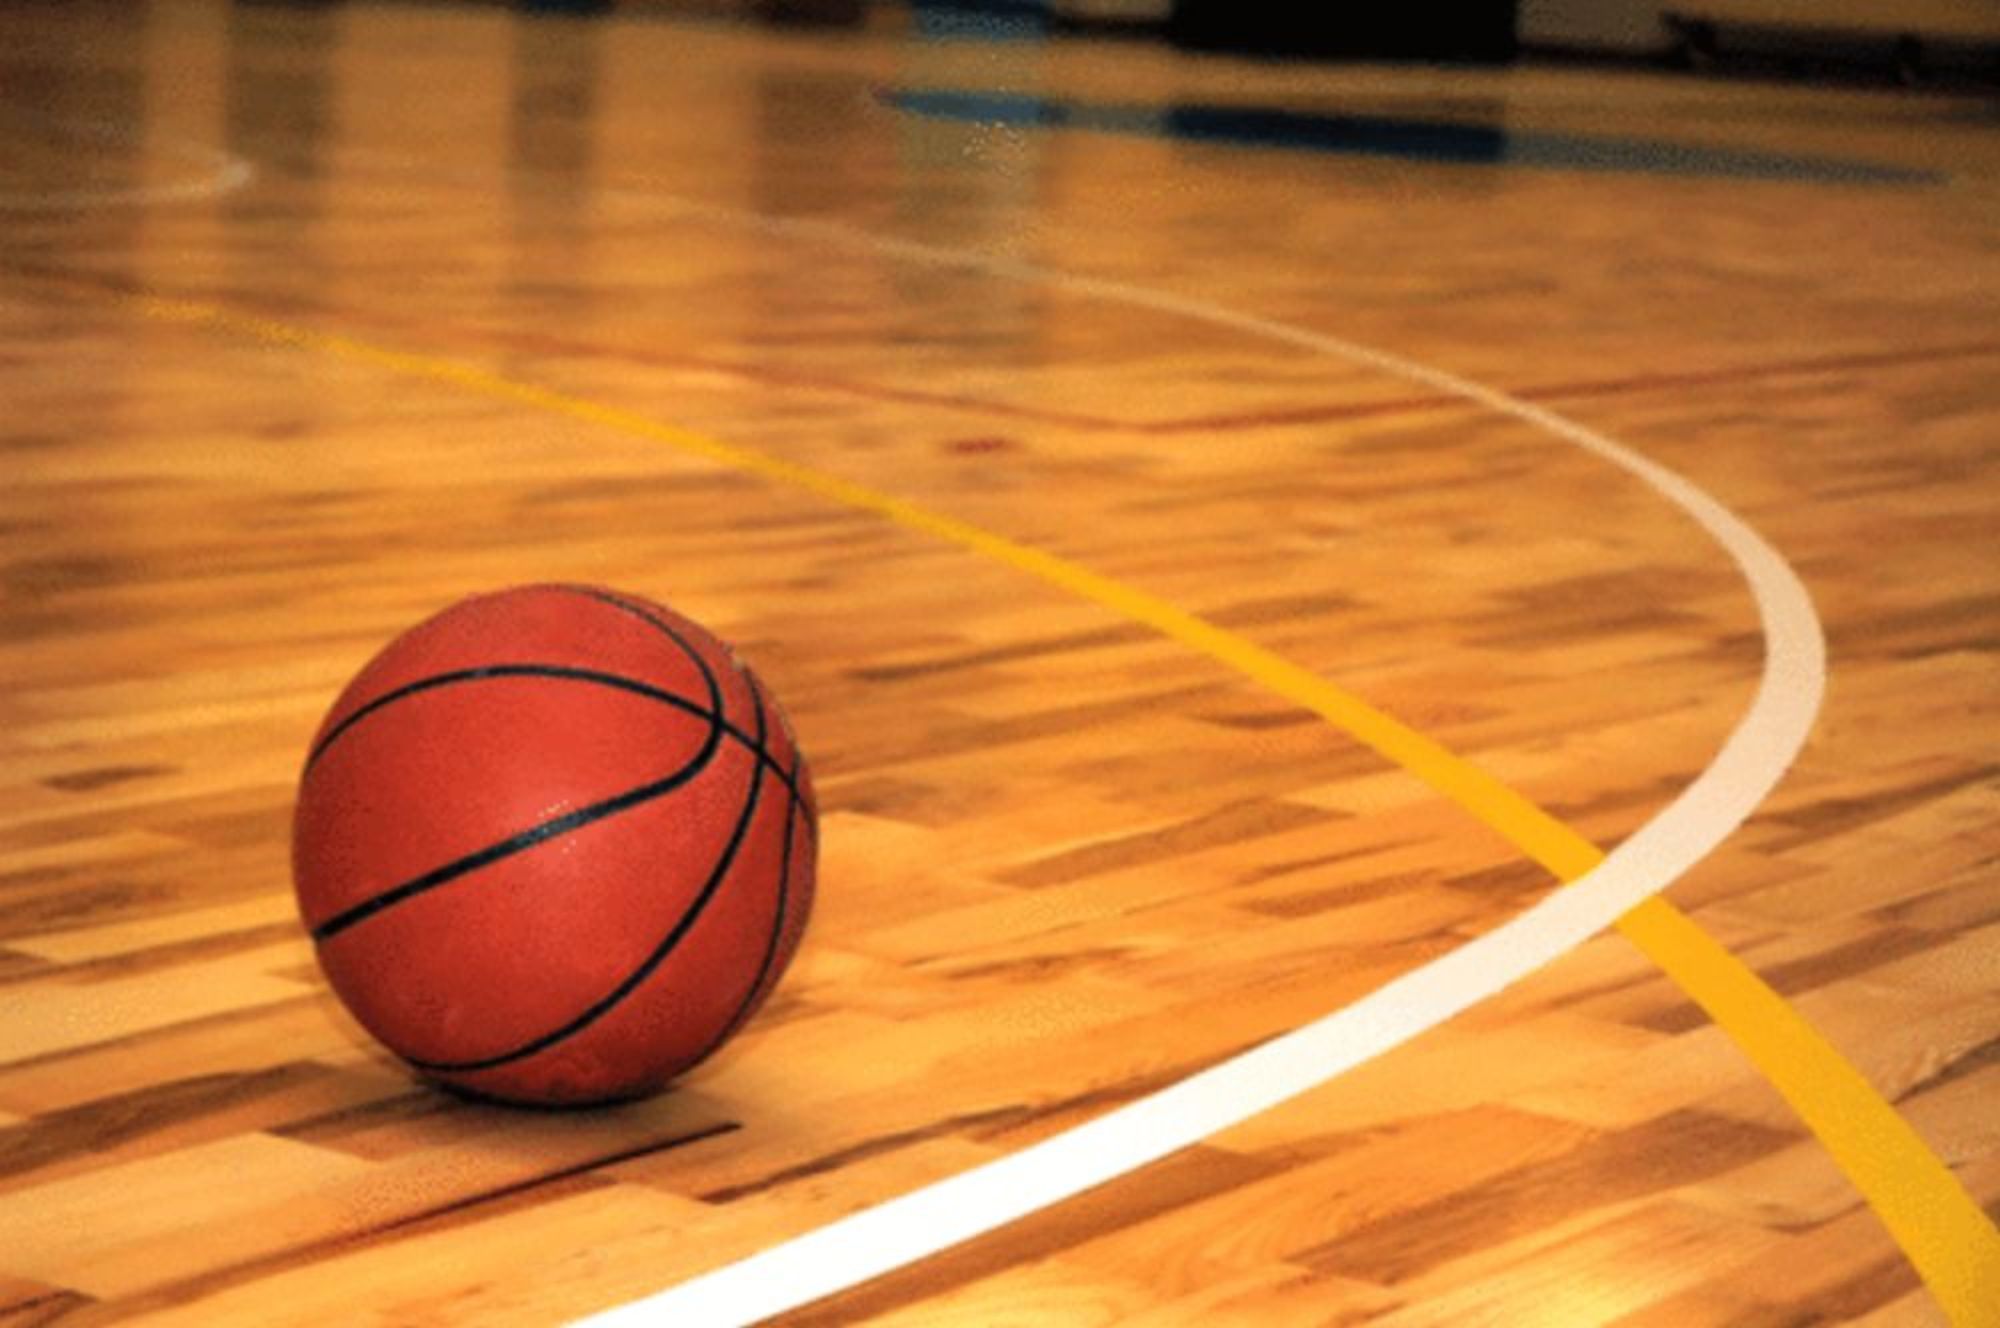 Free Basketball Floor Cliparts, Download Free Basketball Floor Cliparts